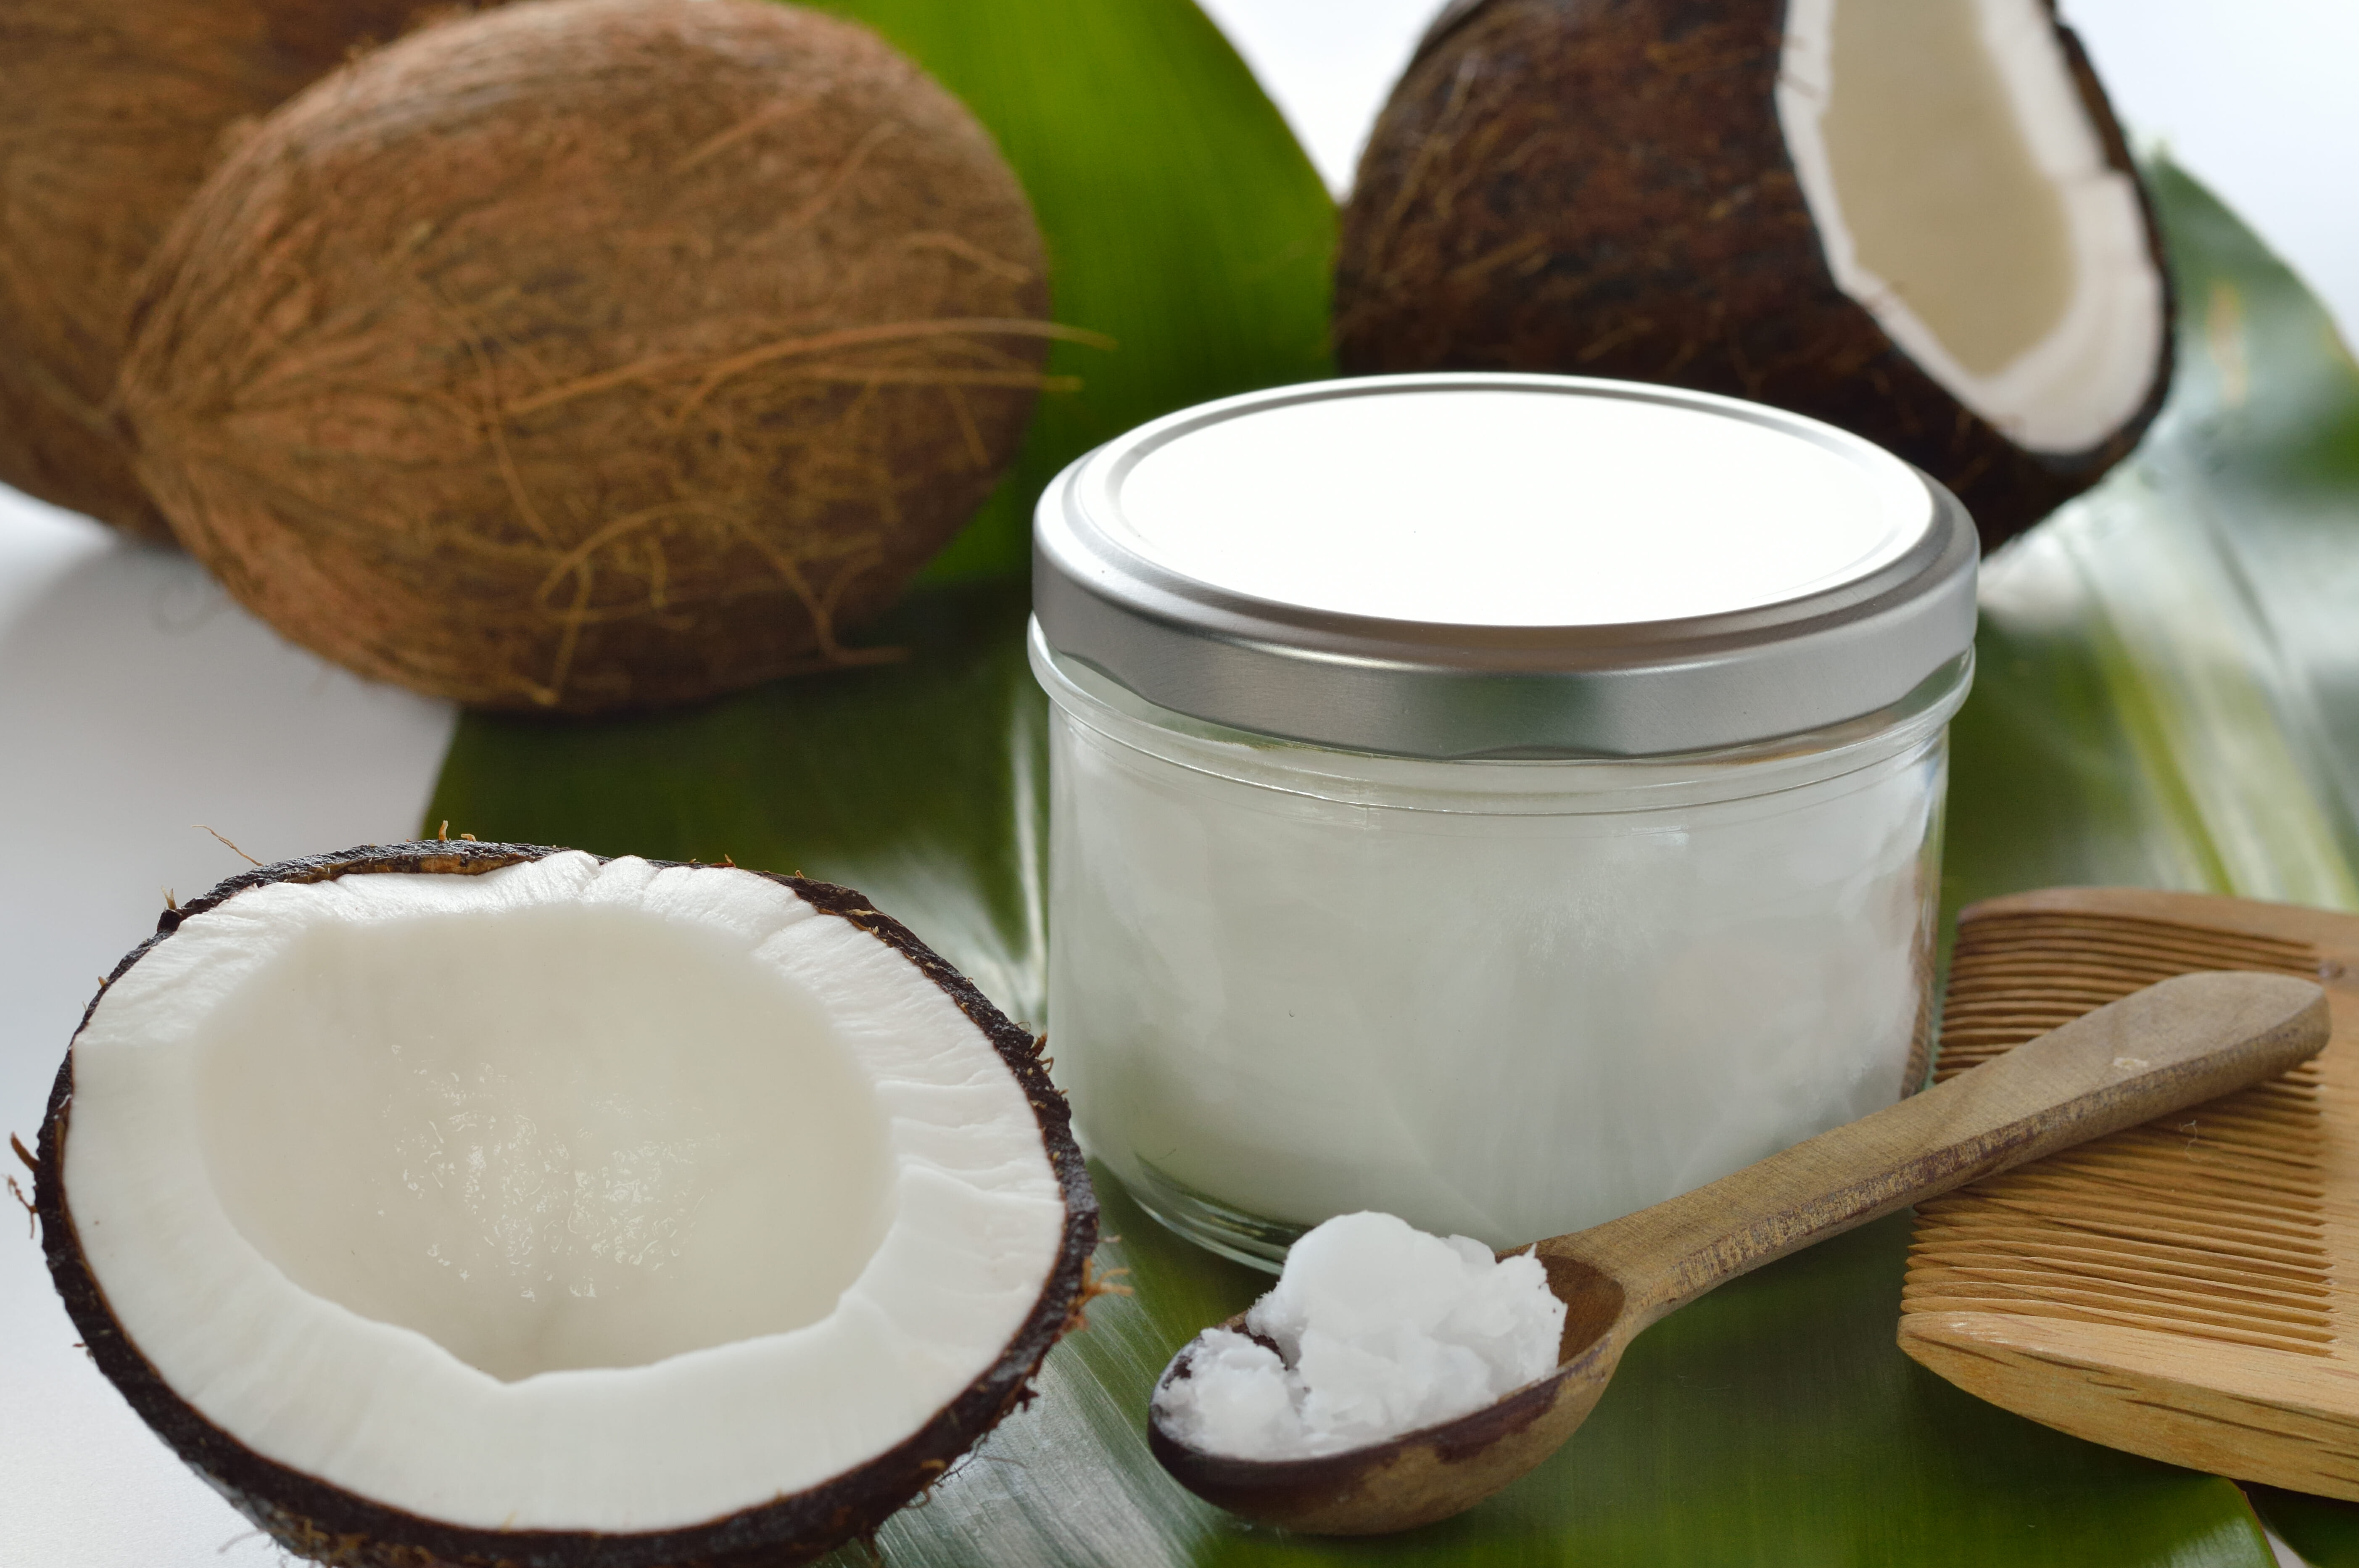 Is Coconut Oil Good for Your Hair and Skin?